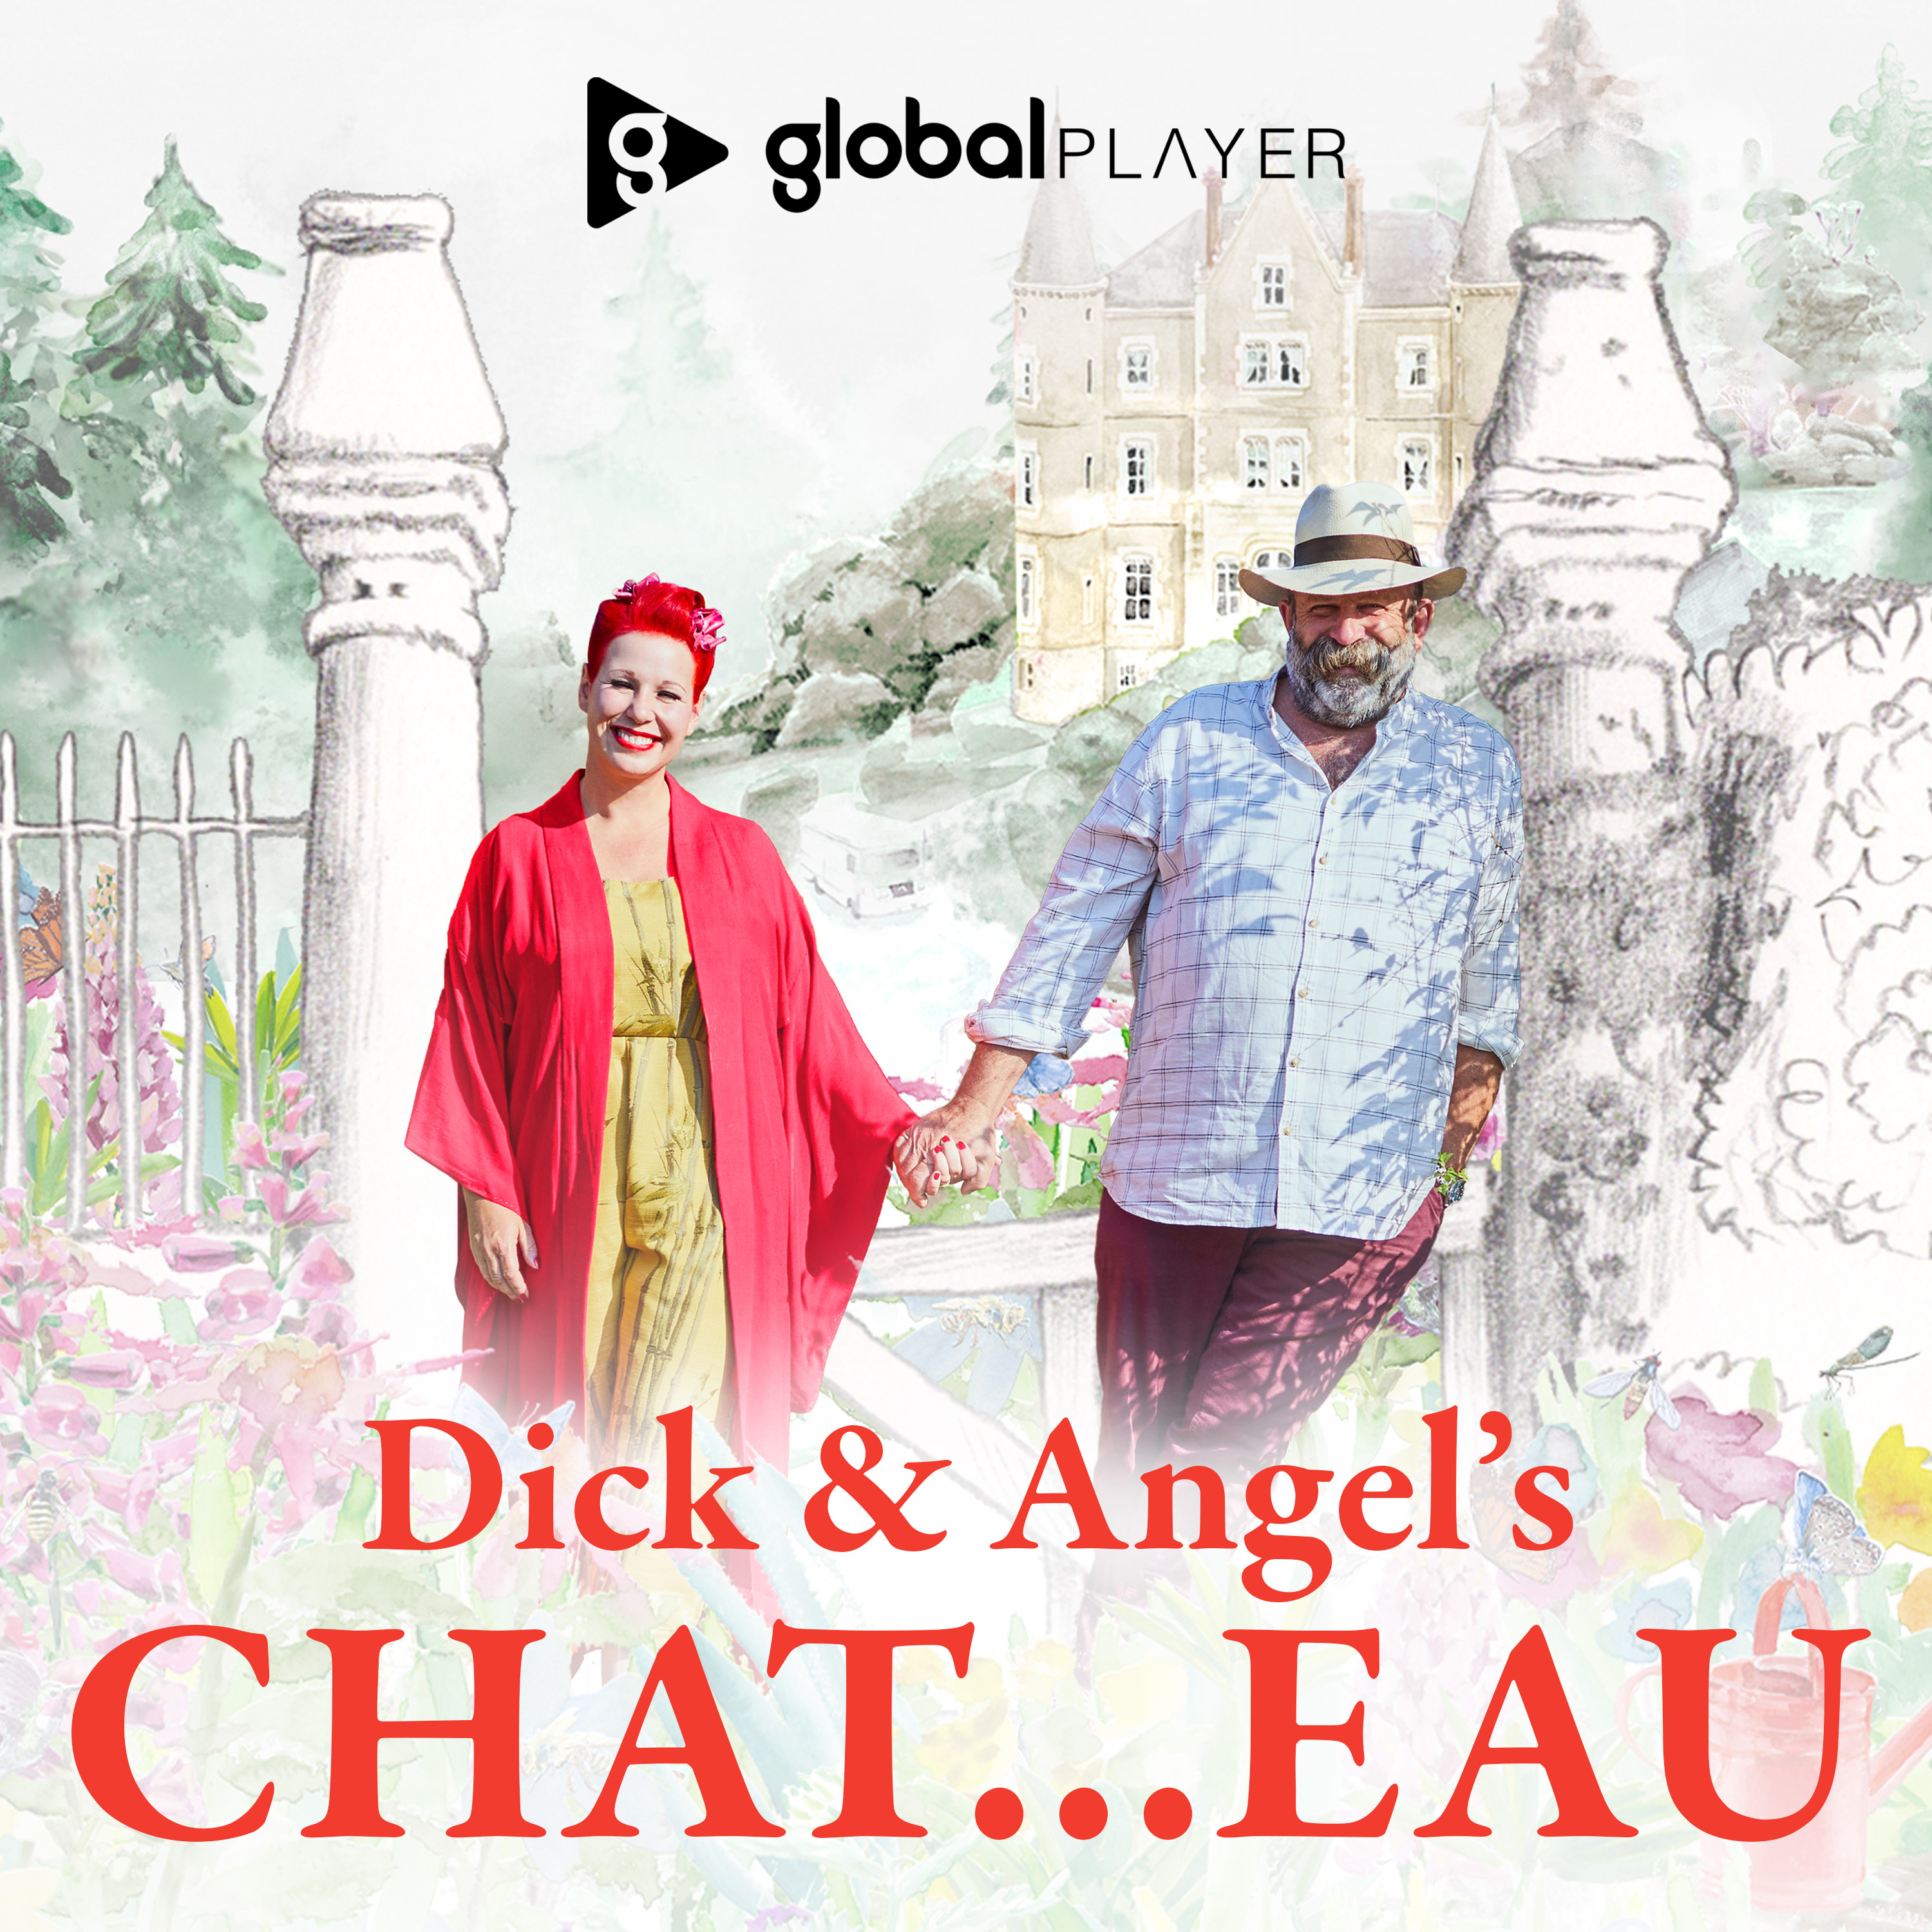 Dick & Angel's Chat...Eau podcast show image